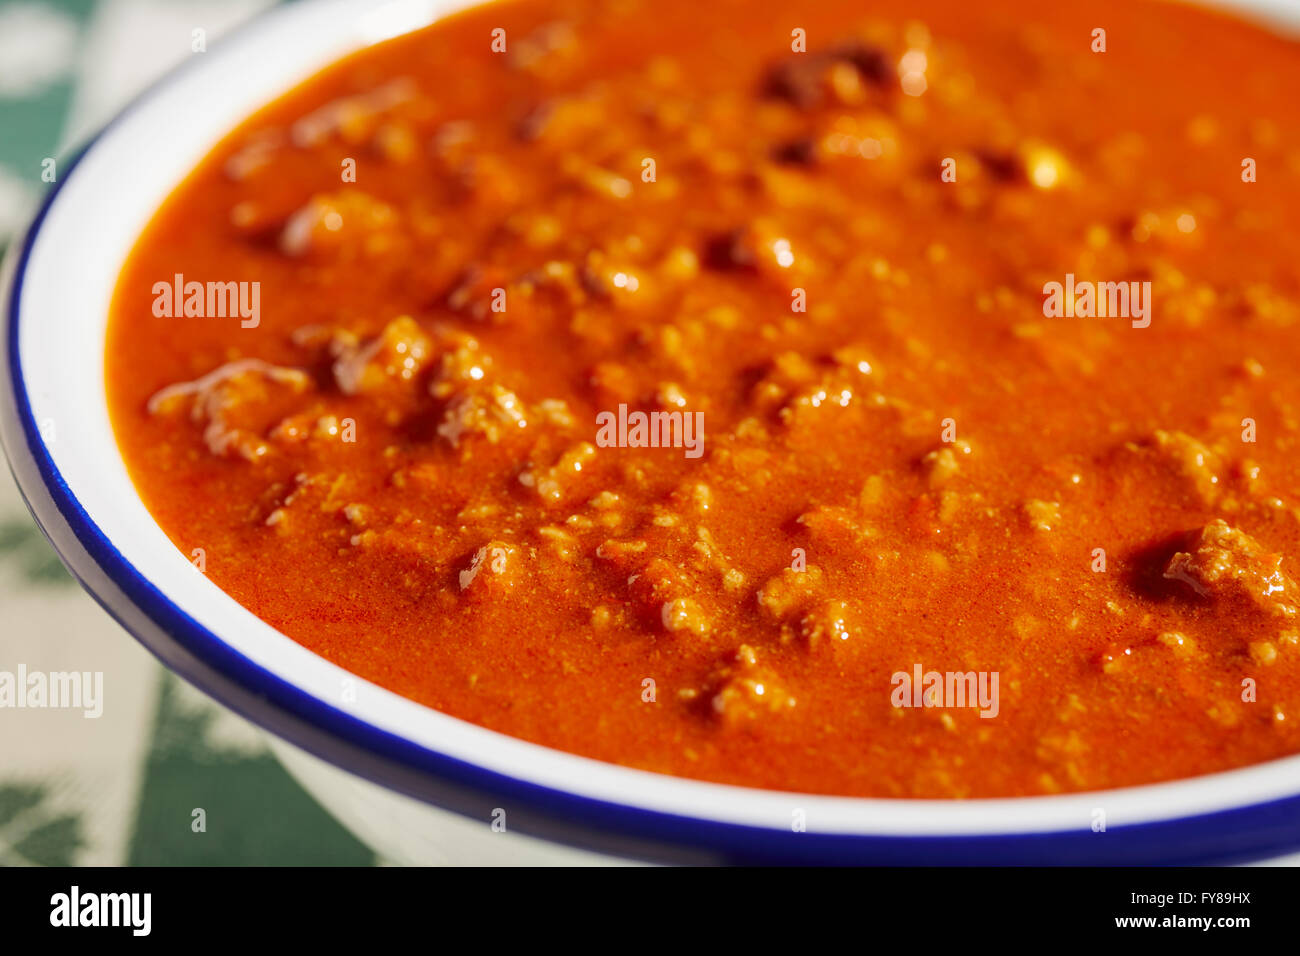 bowl of red chili made with ground beef, called 'chile meat' in New Mexico Stock Photo